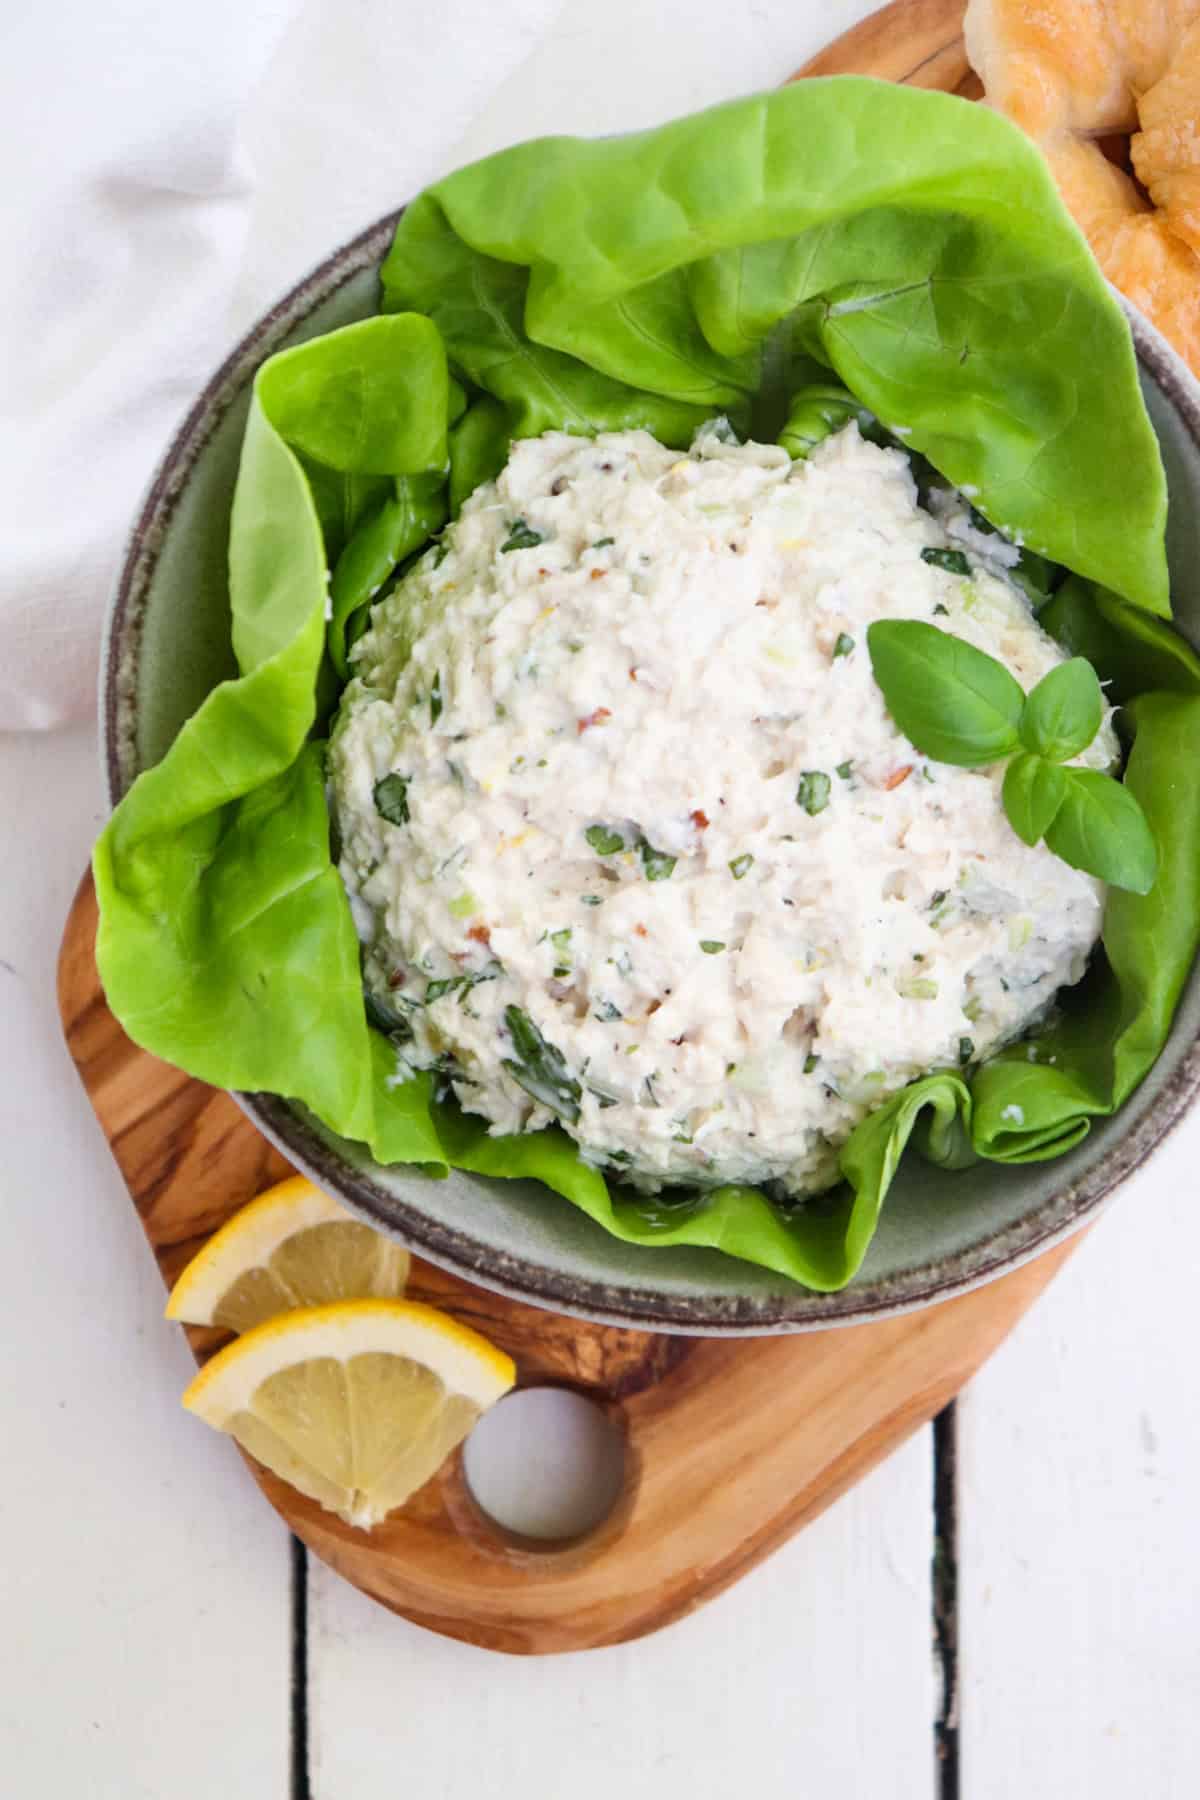 scoop of lemon chicken salad in a bowl of lettuce with lemon and basil for garnish.